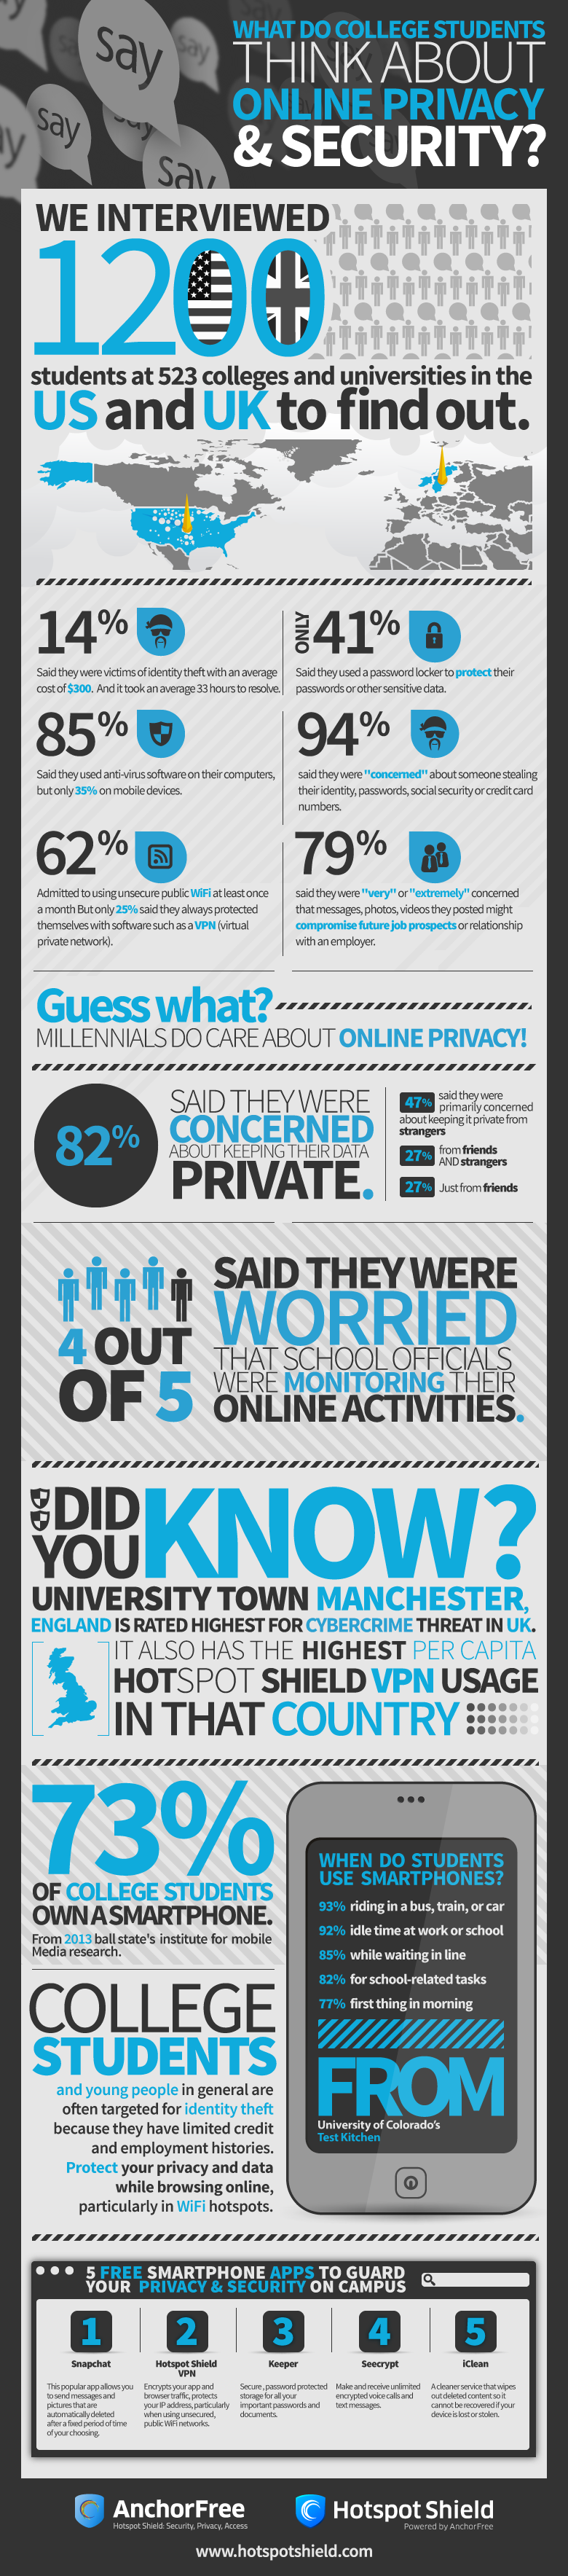 What Do College Students Think About Online Privacy & Security?